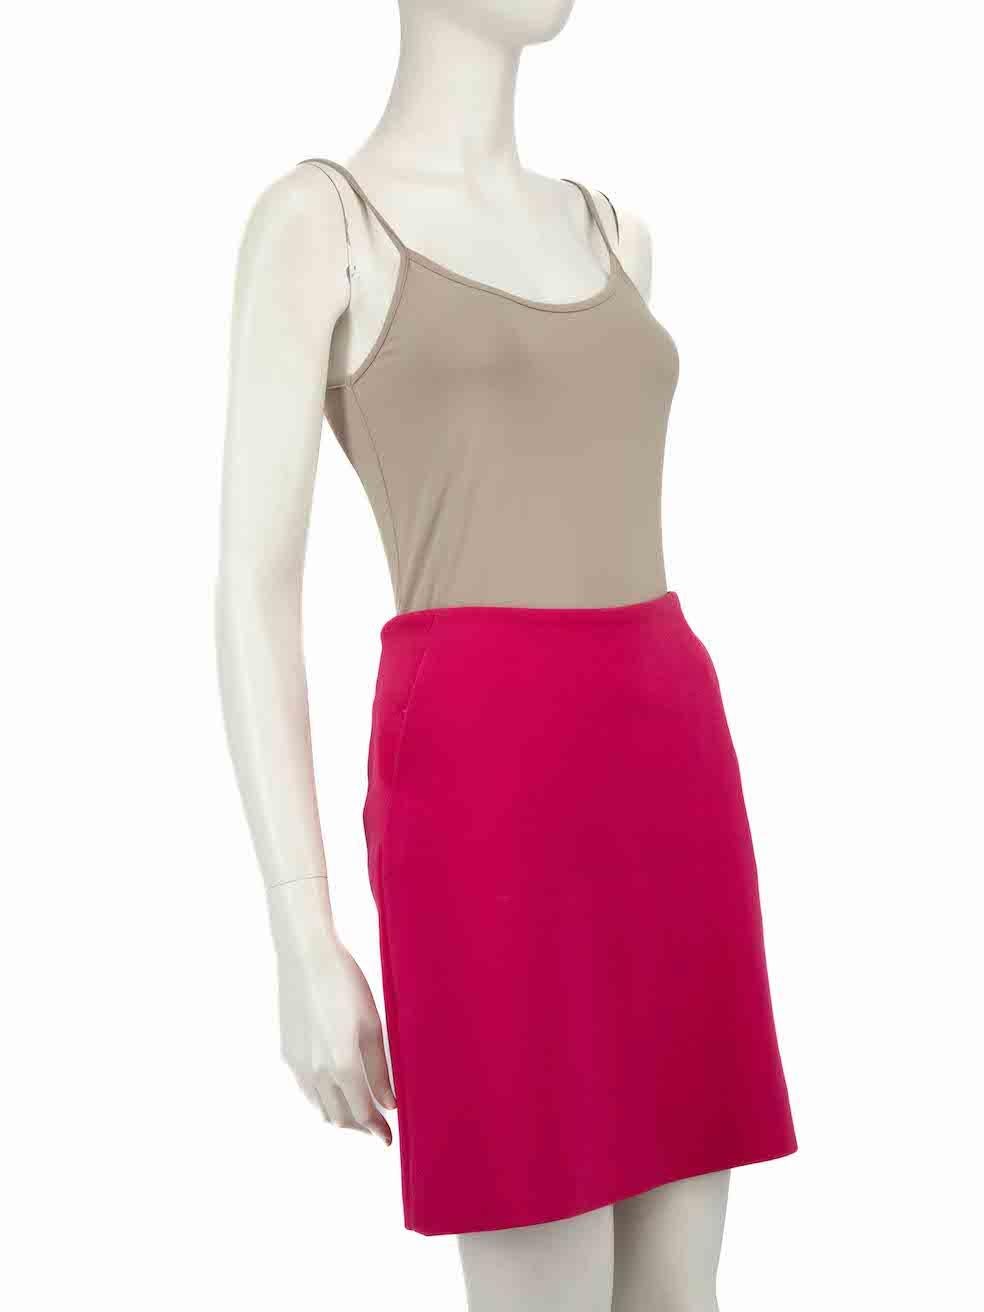 CONDITION is Good. Minor wear to skirt is evident. Light wear to the front and back with plucks and pilling to the weave on this used Lanvin designer resale item.
 
 
 
 Details
 
 
 Pink
 
 Cotton
 
 Skirt
 
 A-line
 
 Mini
 
 2x Side pockets
 
